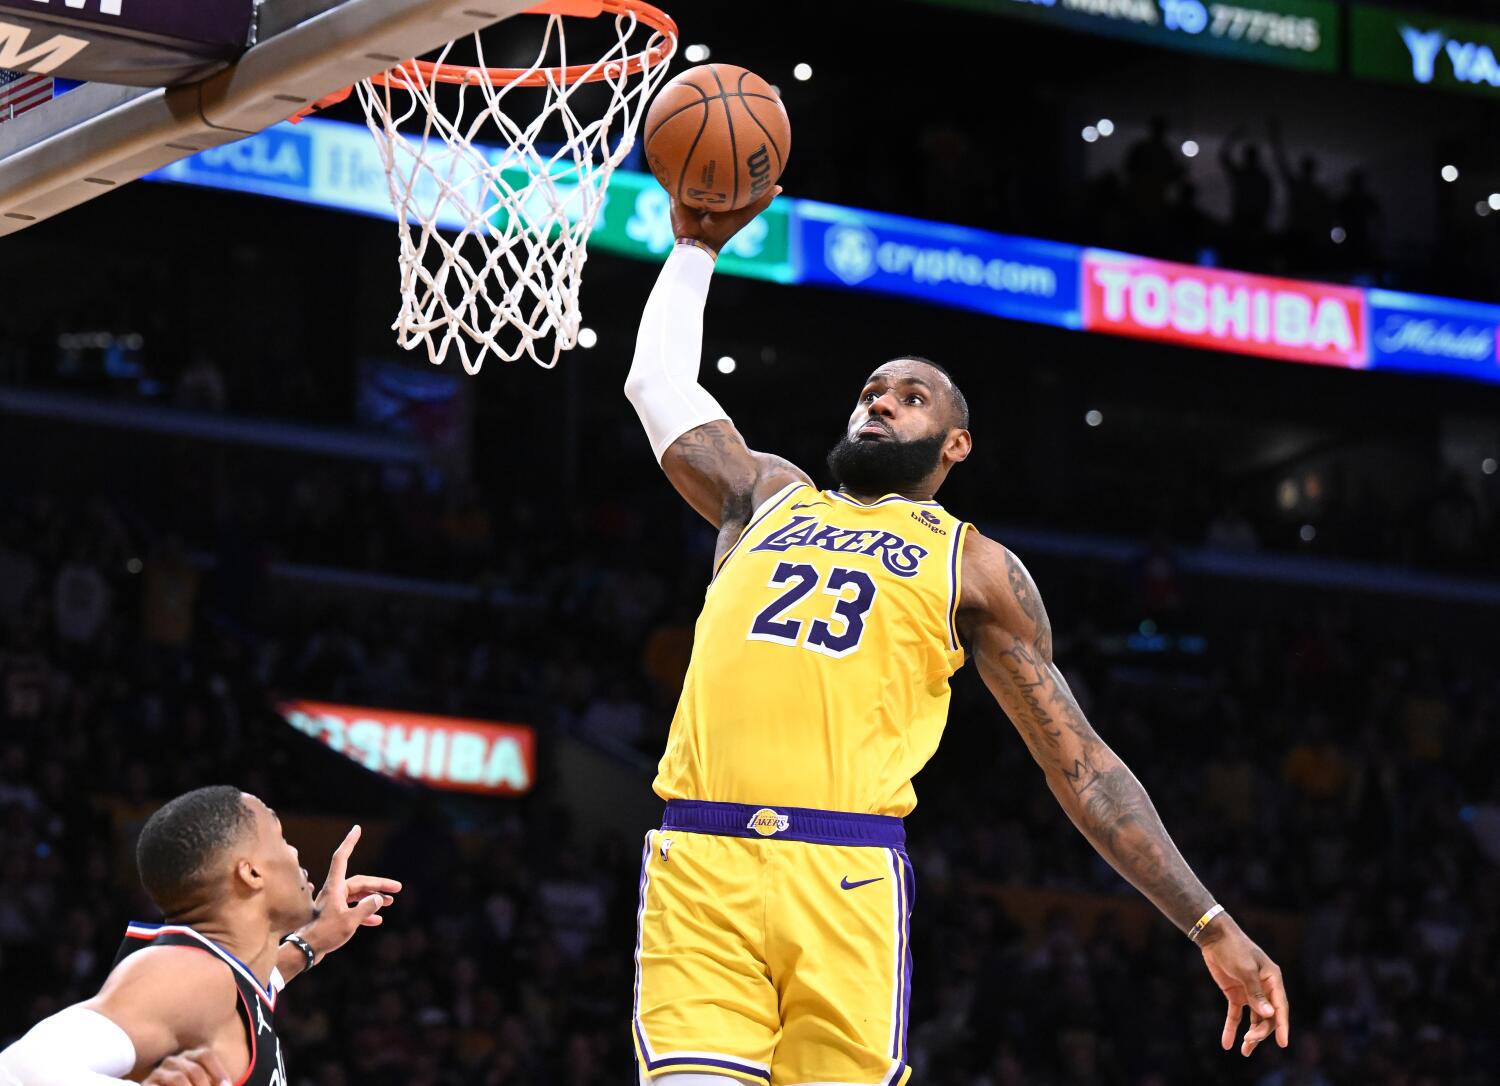 LeBron James, Lakers hold off Clippers in overtime to snap 11-game skid in rivalry